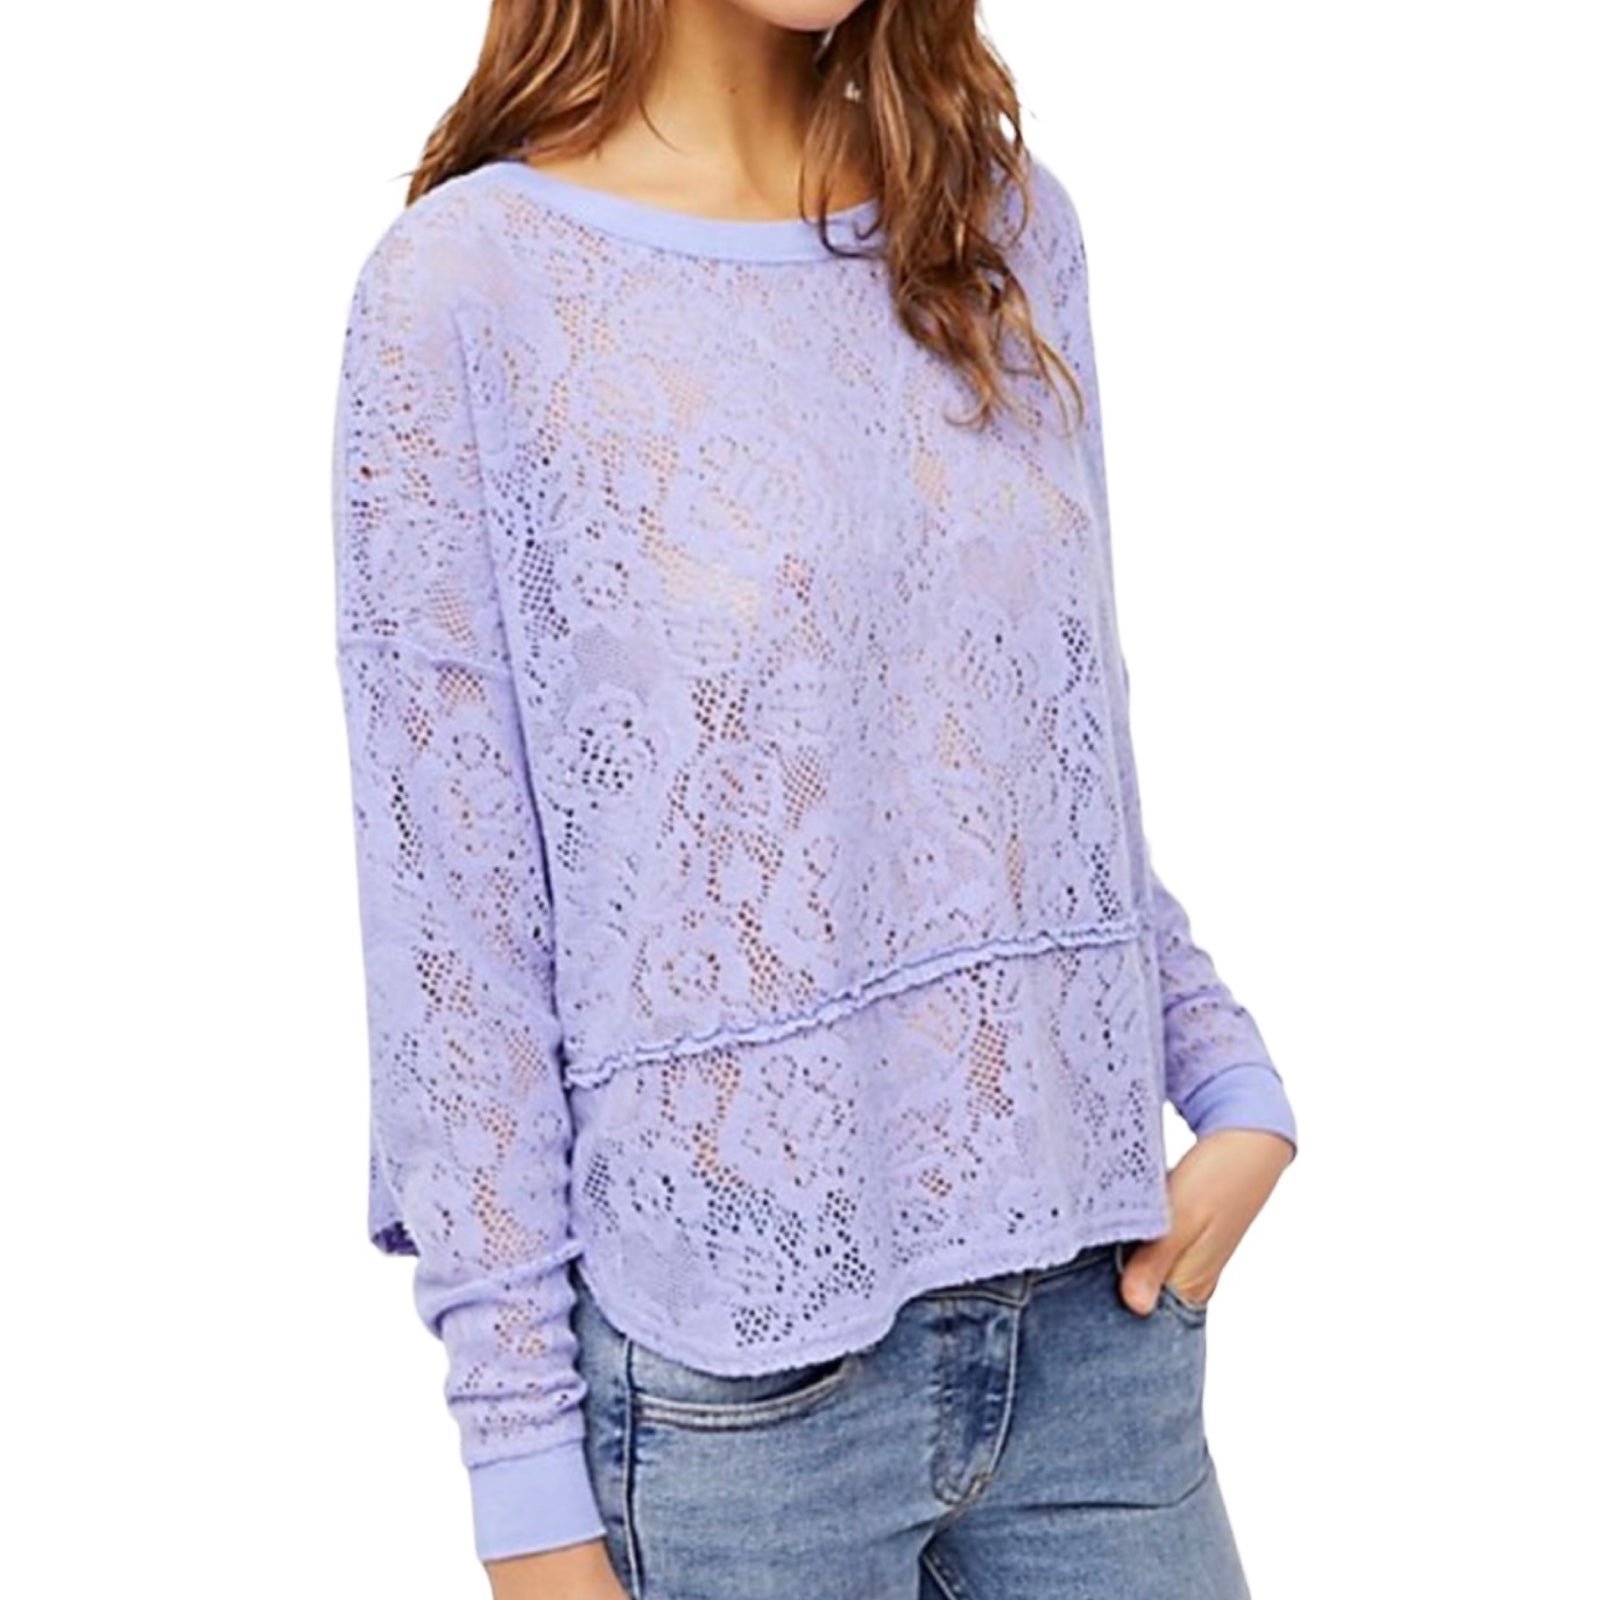 Affordable Free People Not Cold In This Lace Lavender P